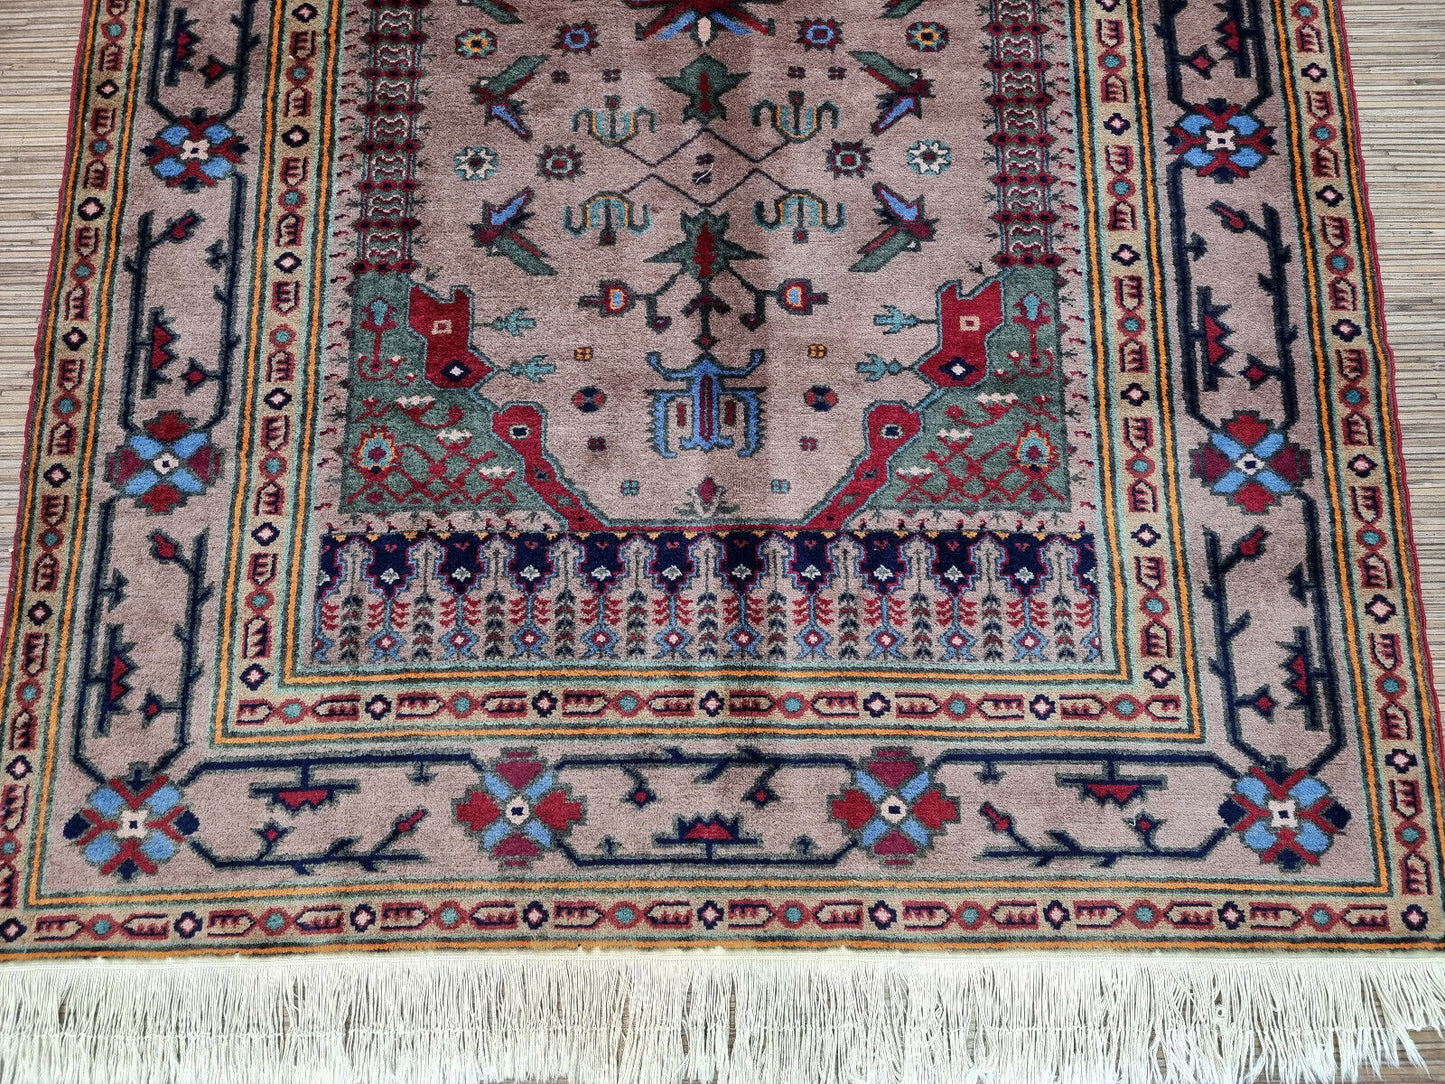 Close-up of red hues on Handmade Vintage Caucasian Shirvan Rug - Detailed view highlighting the rich red hues in the rug's design.